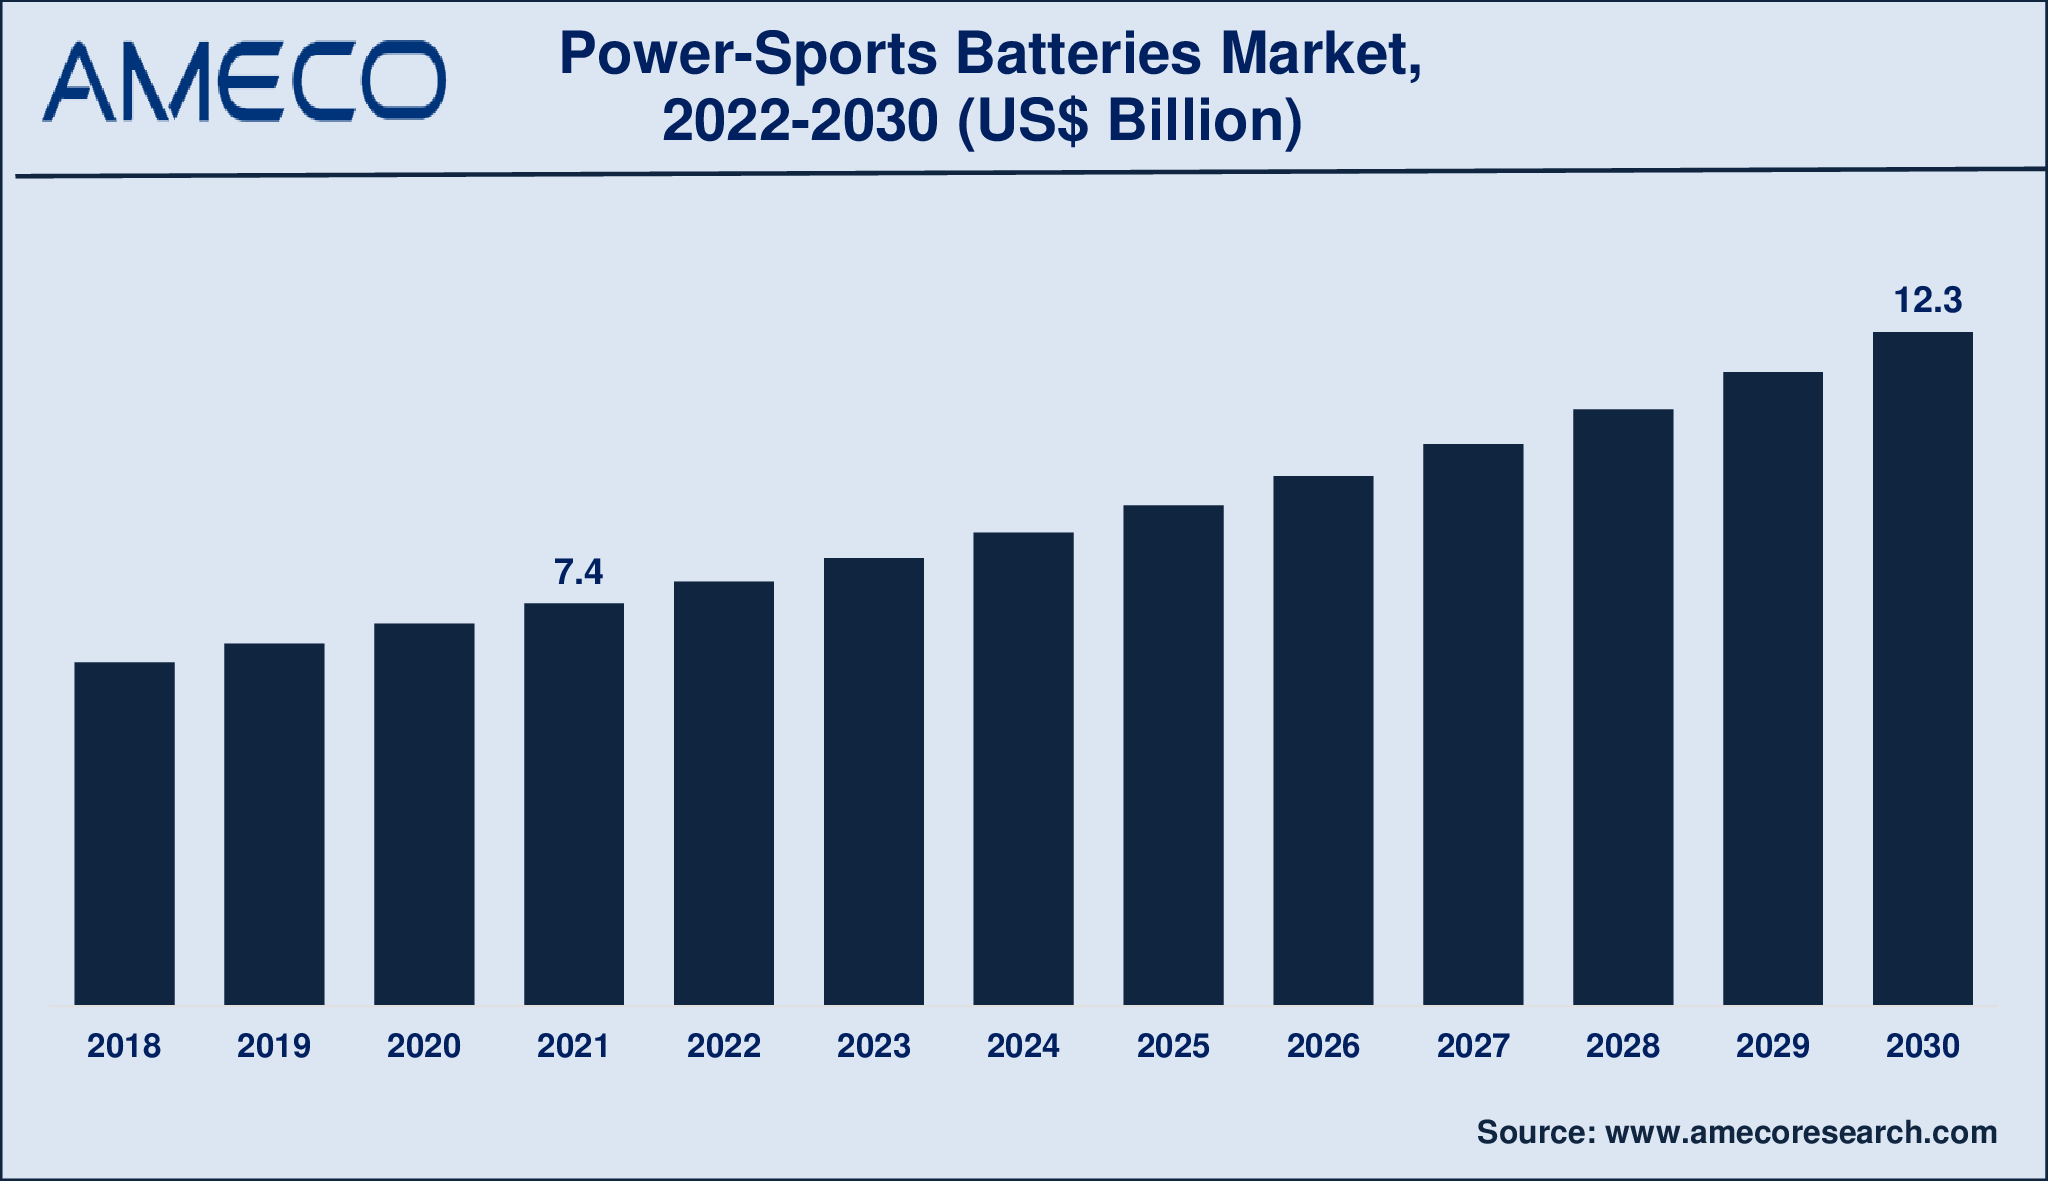 Power-Sports Batteries Market Size, Share, Growth, Trends, and Forecast 2022-2030